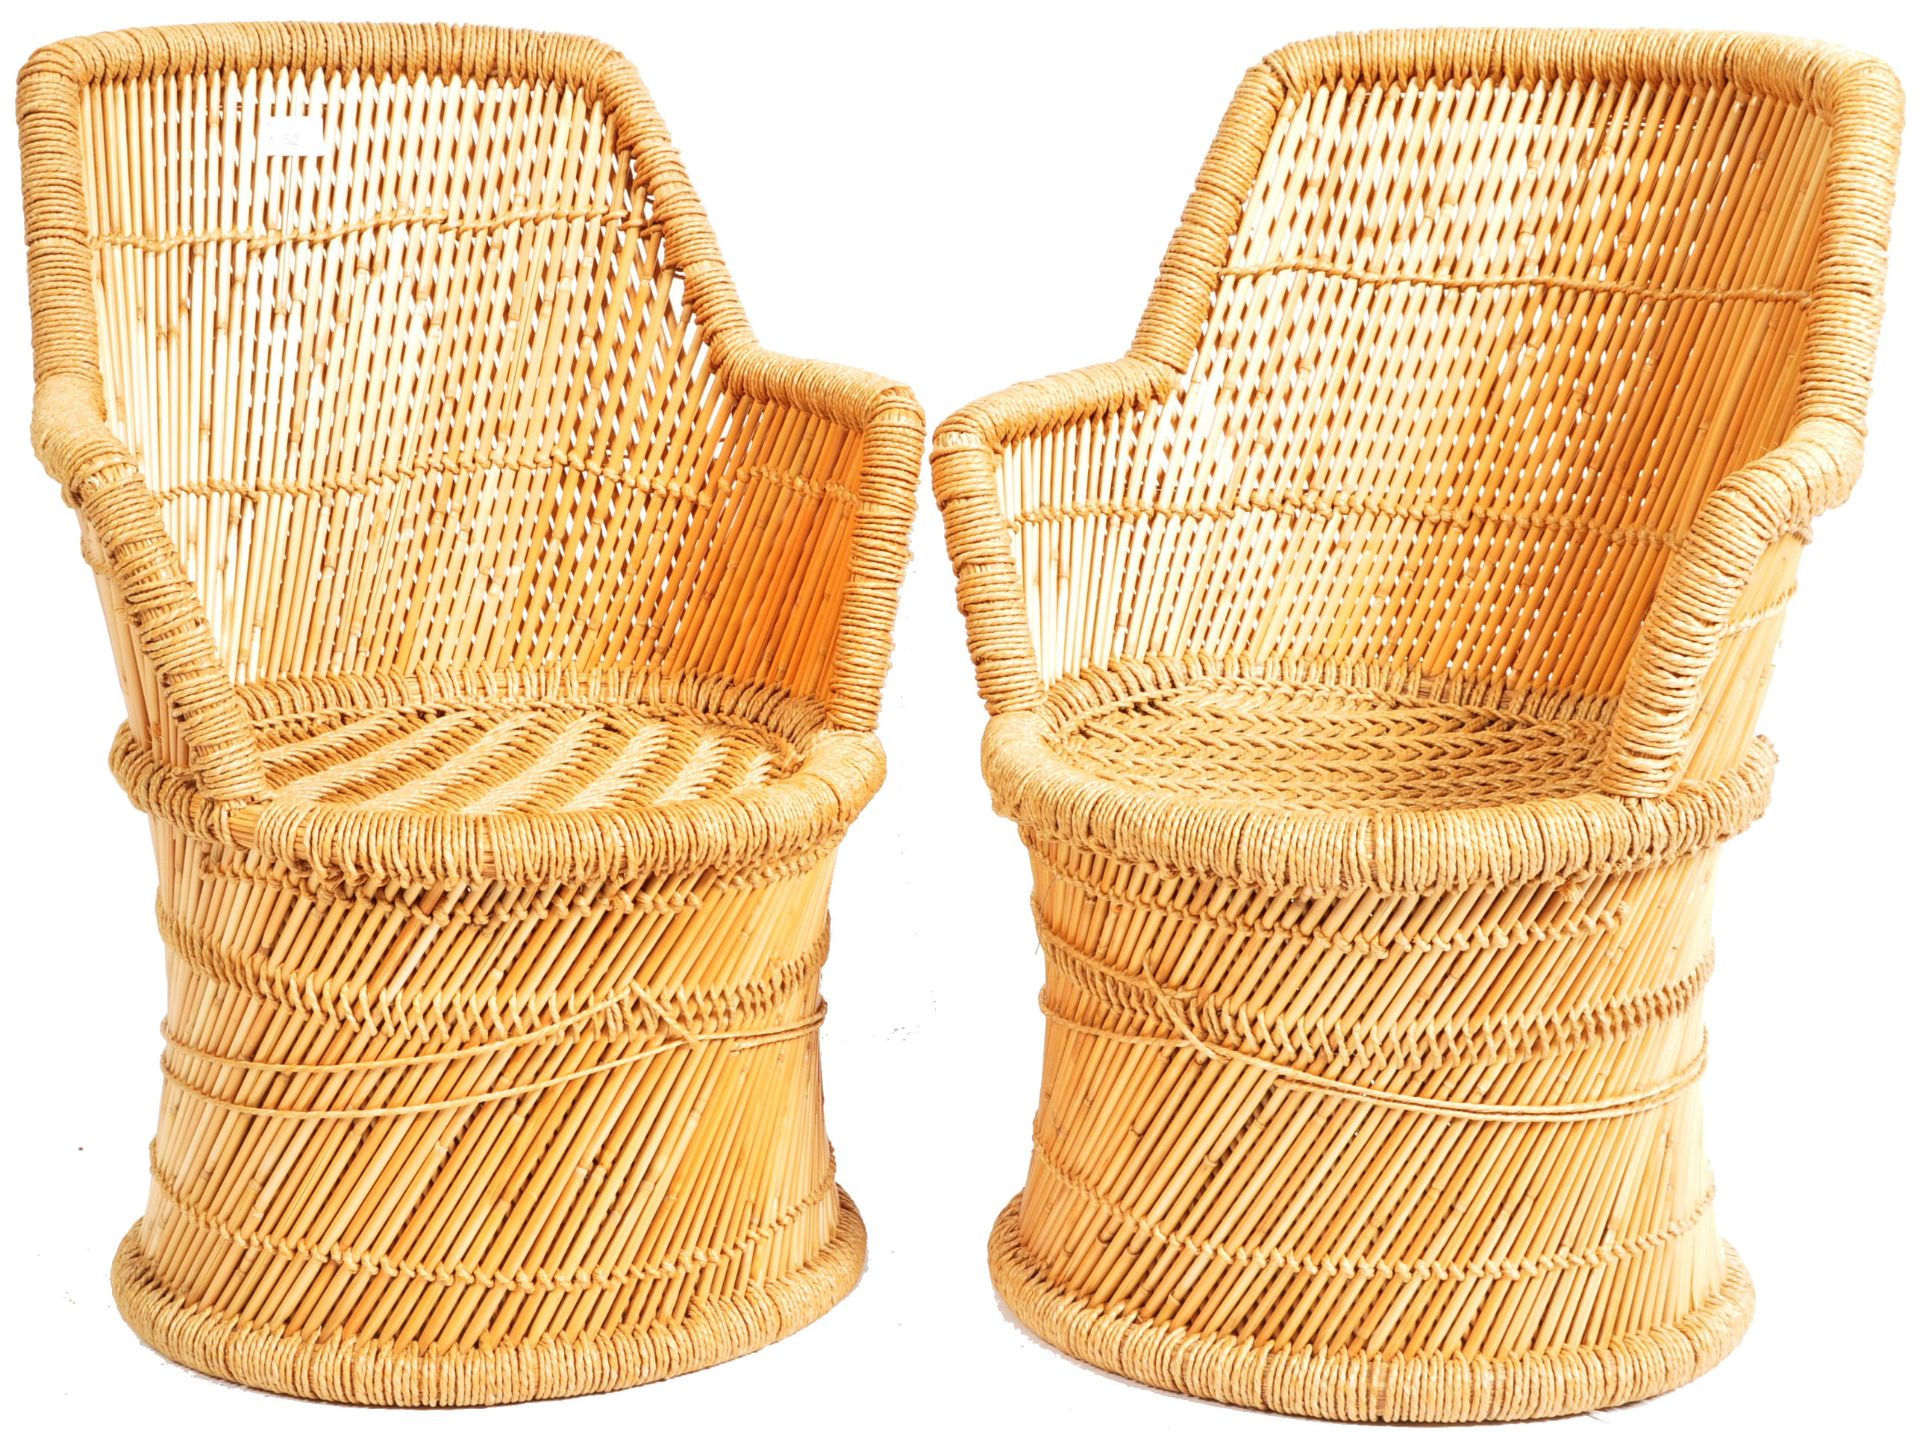 CHARMING MATCHING PAIR OF WICKER AND CANE CHILDRENS CHAIRS